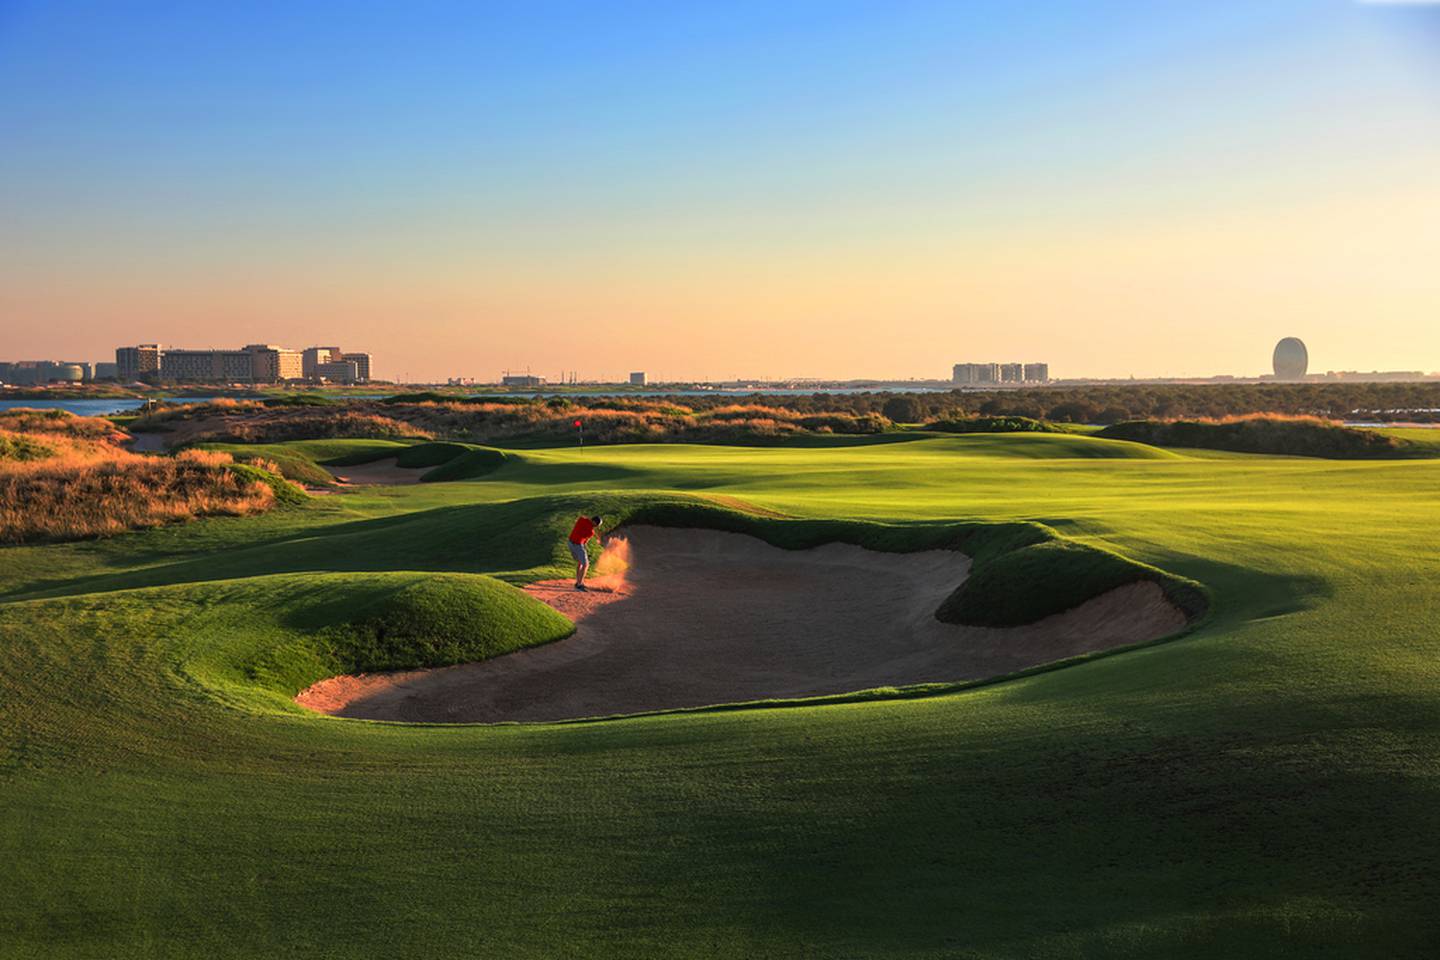 Yas Links will be the new home of the Abu Dhabi HSBC Championship. Courtesy Yas Links